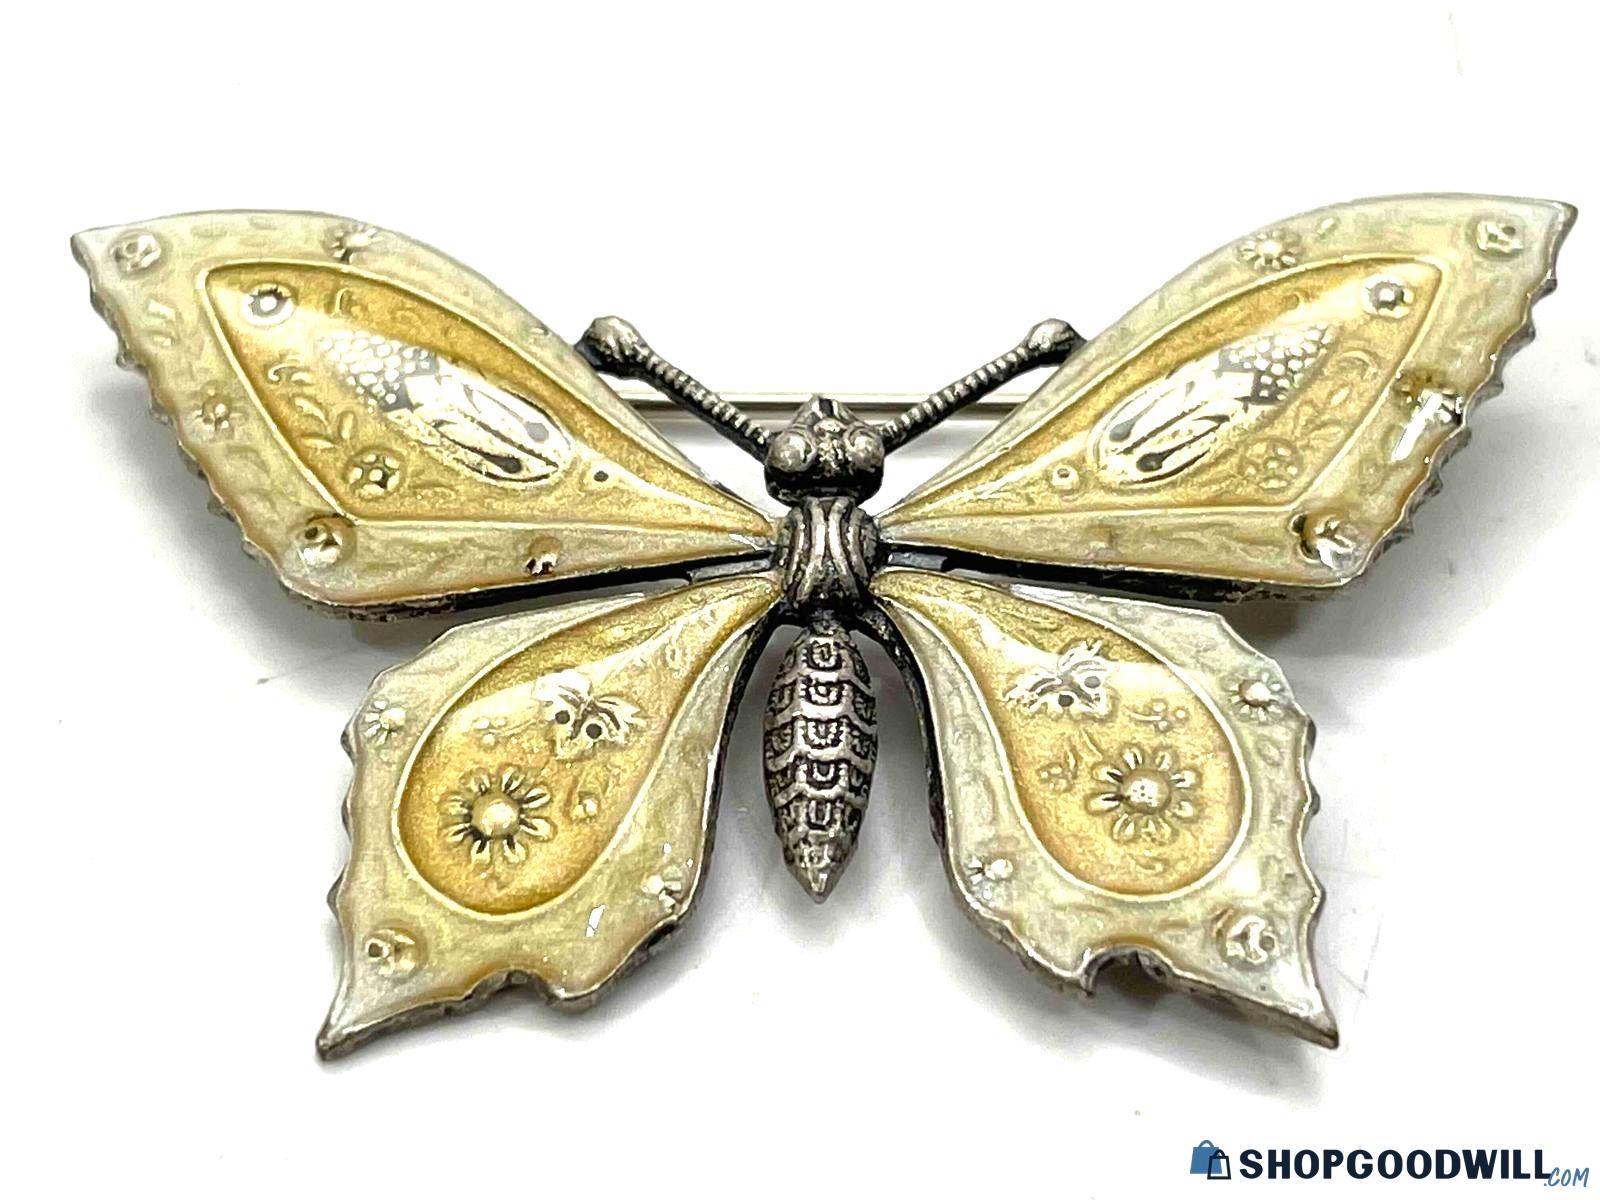 Vintage Catherine Popesco France Butterfly Brooch - shopgoodwill.com